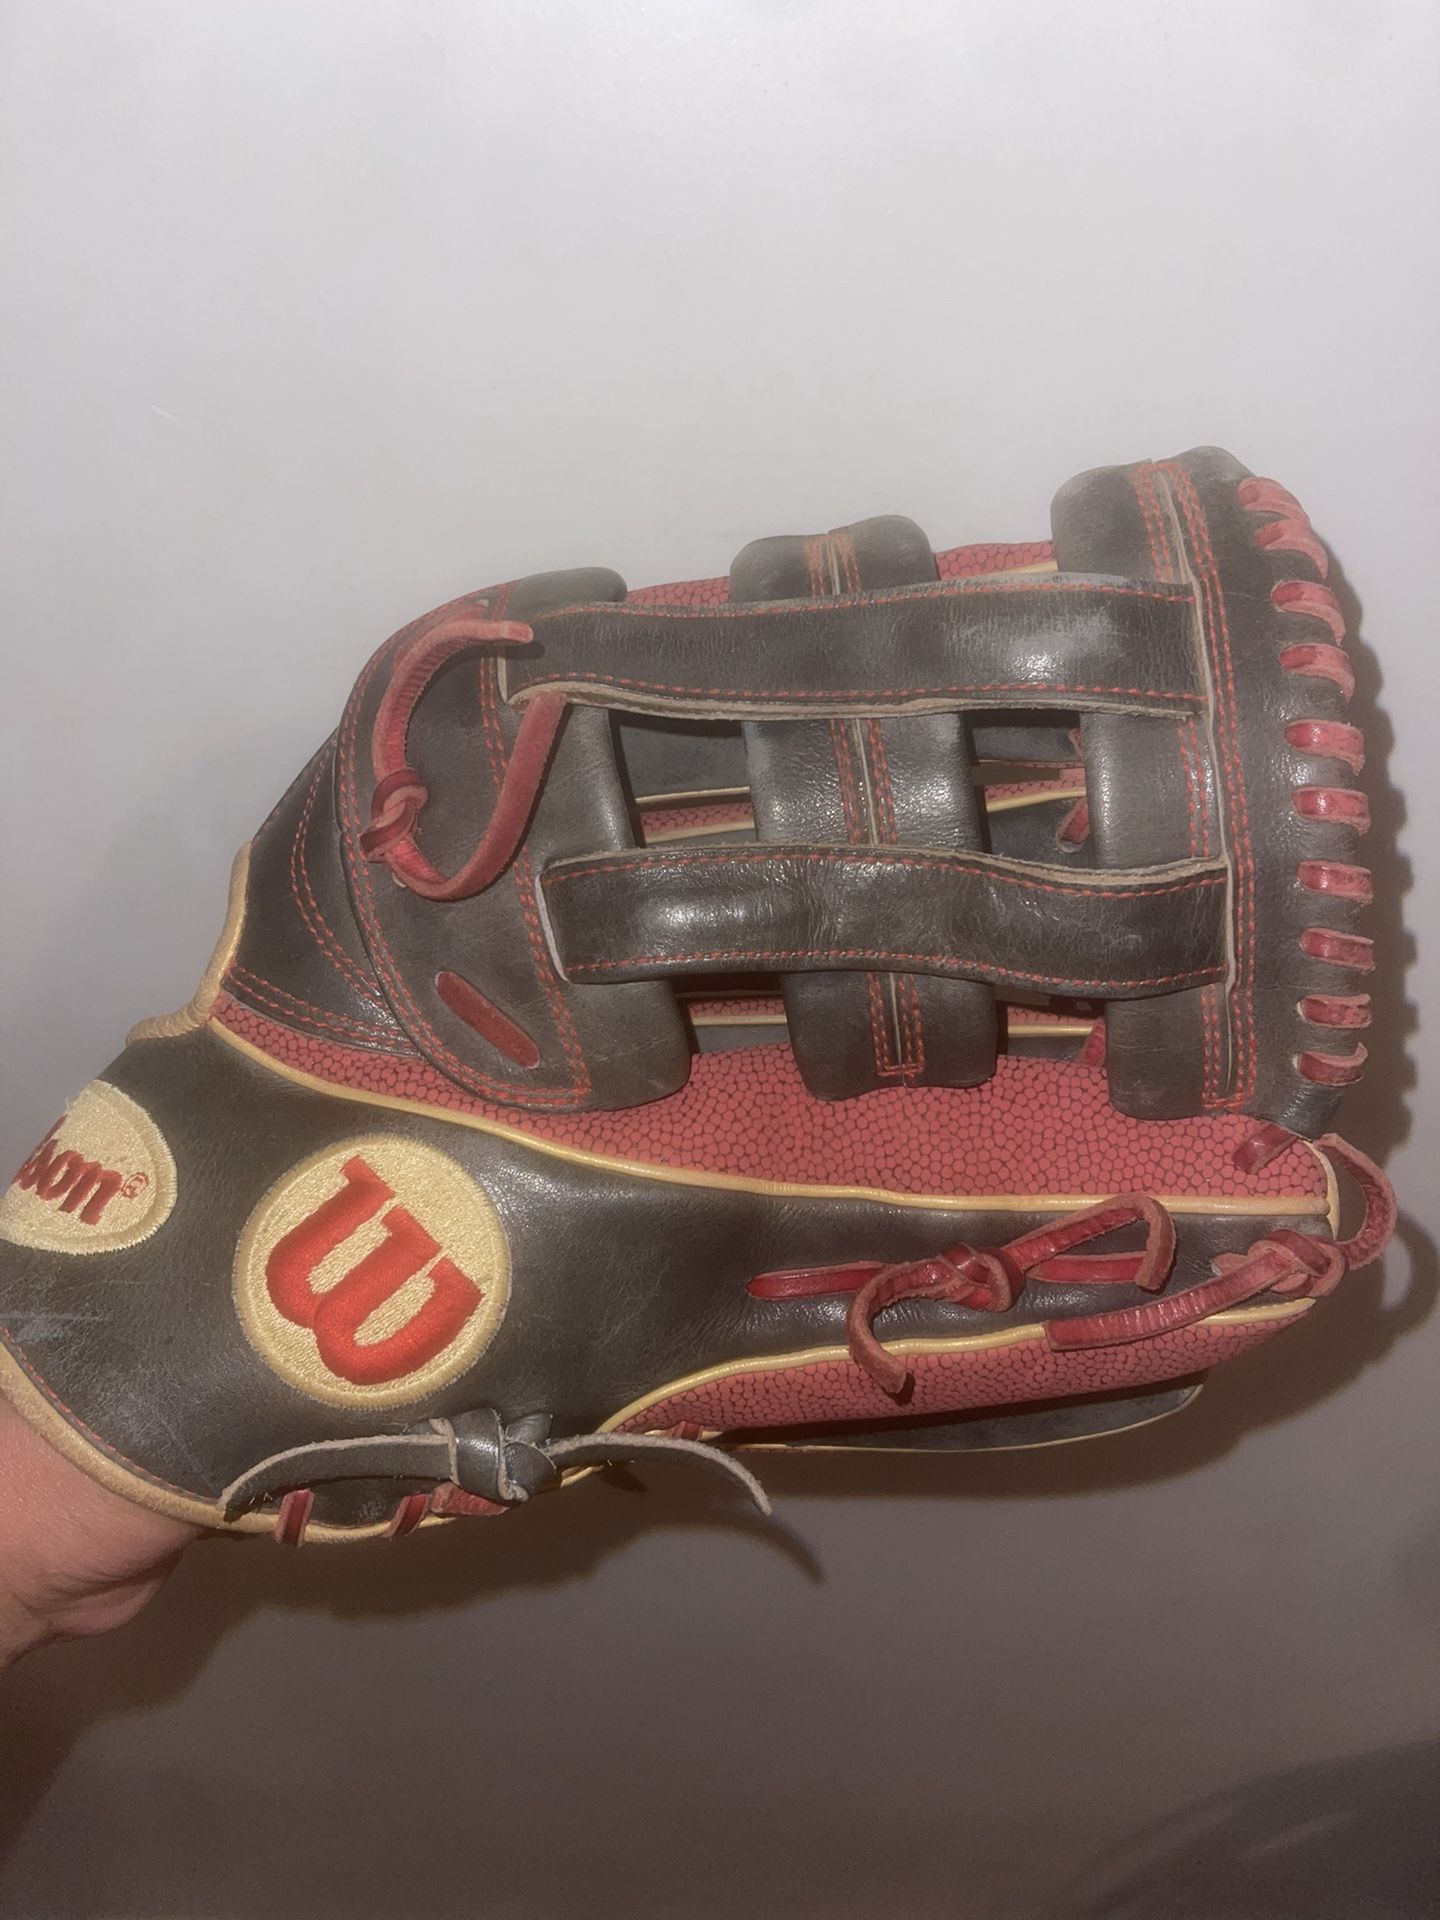 MB50 WILSON A2K OUTFIELD GLOVE